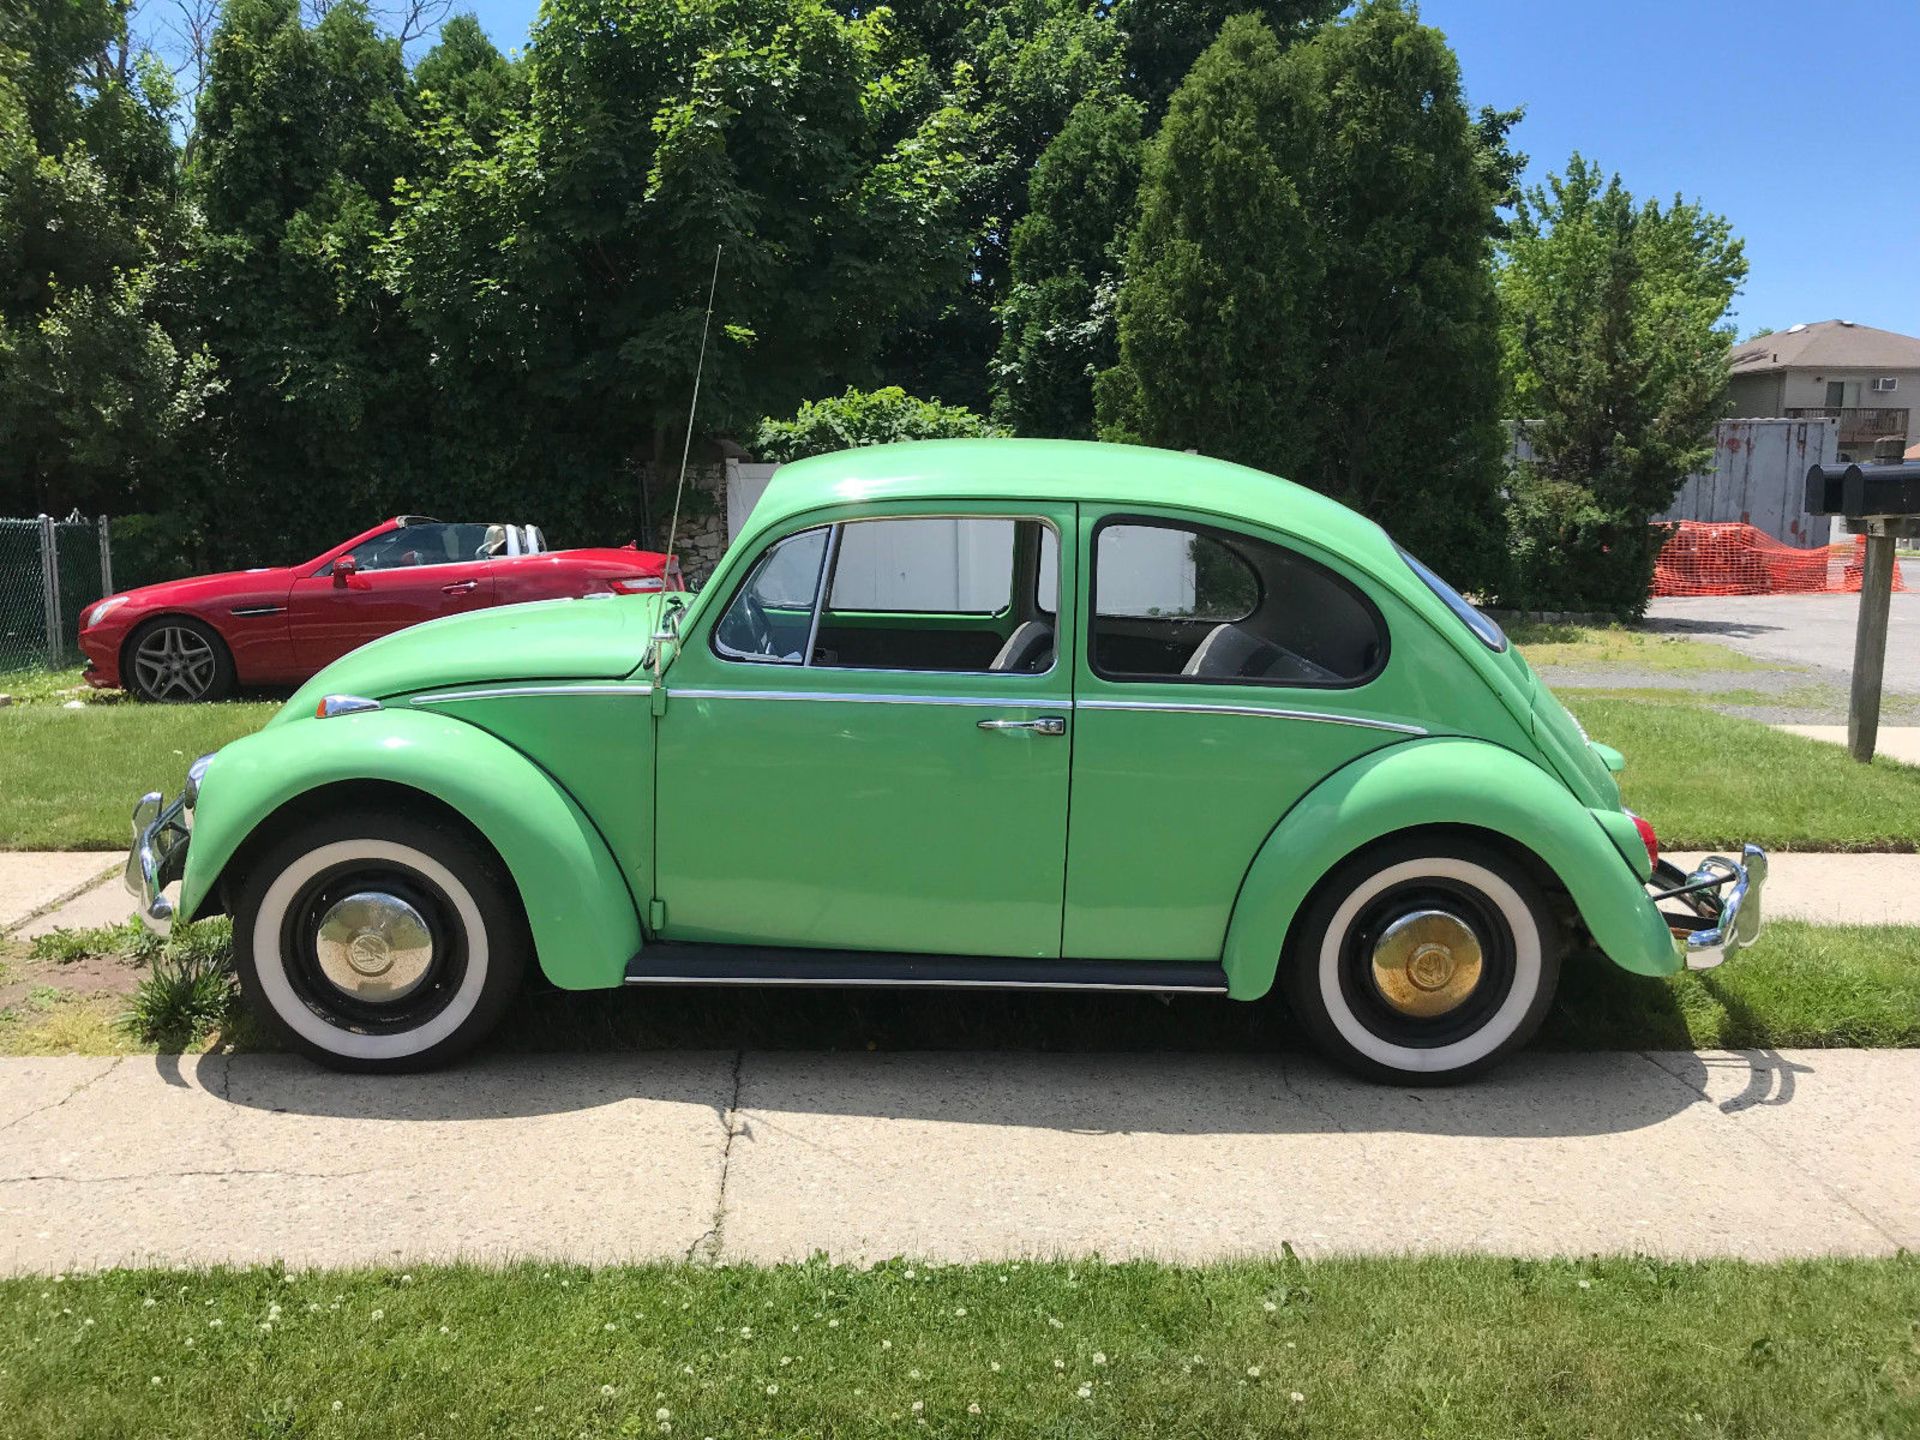 1967 Volkswagen Beetle - Classic, BRAND NEW INTERIOR, VERY COLLECTIBLE, BEATLES GREEN, LOCATION NY - Image 3 of 10